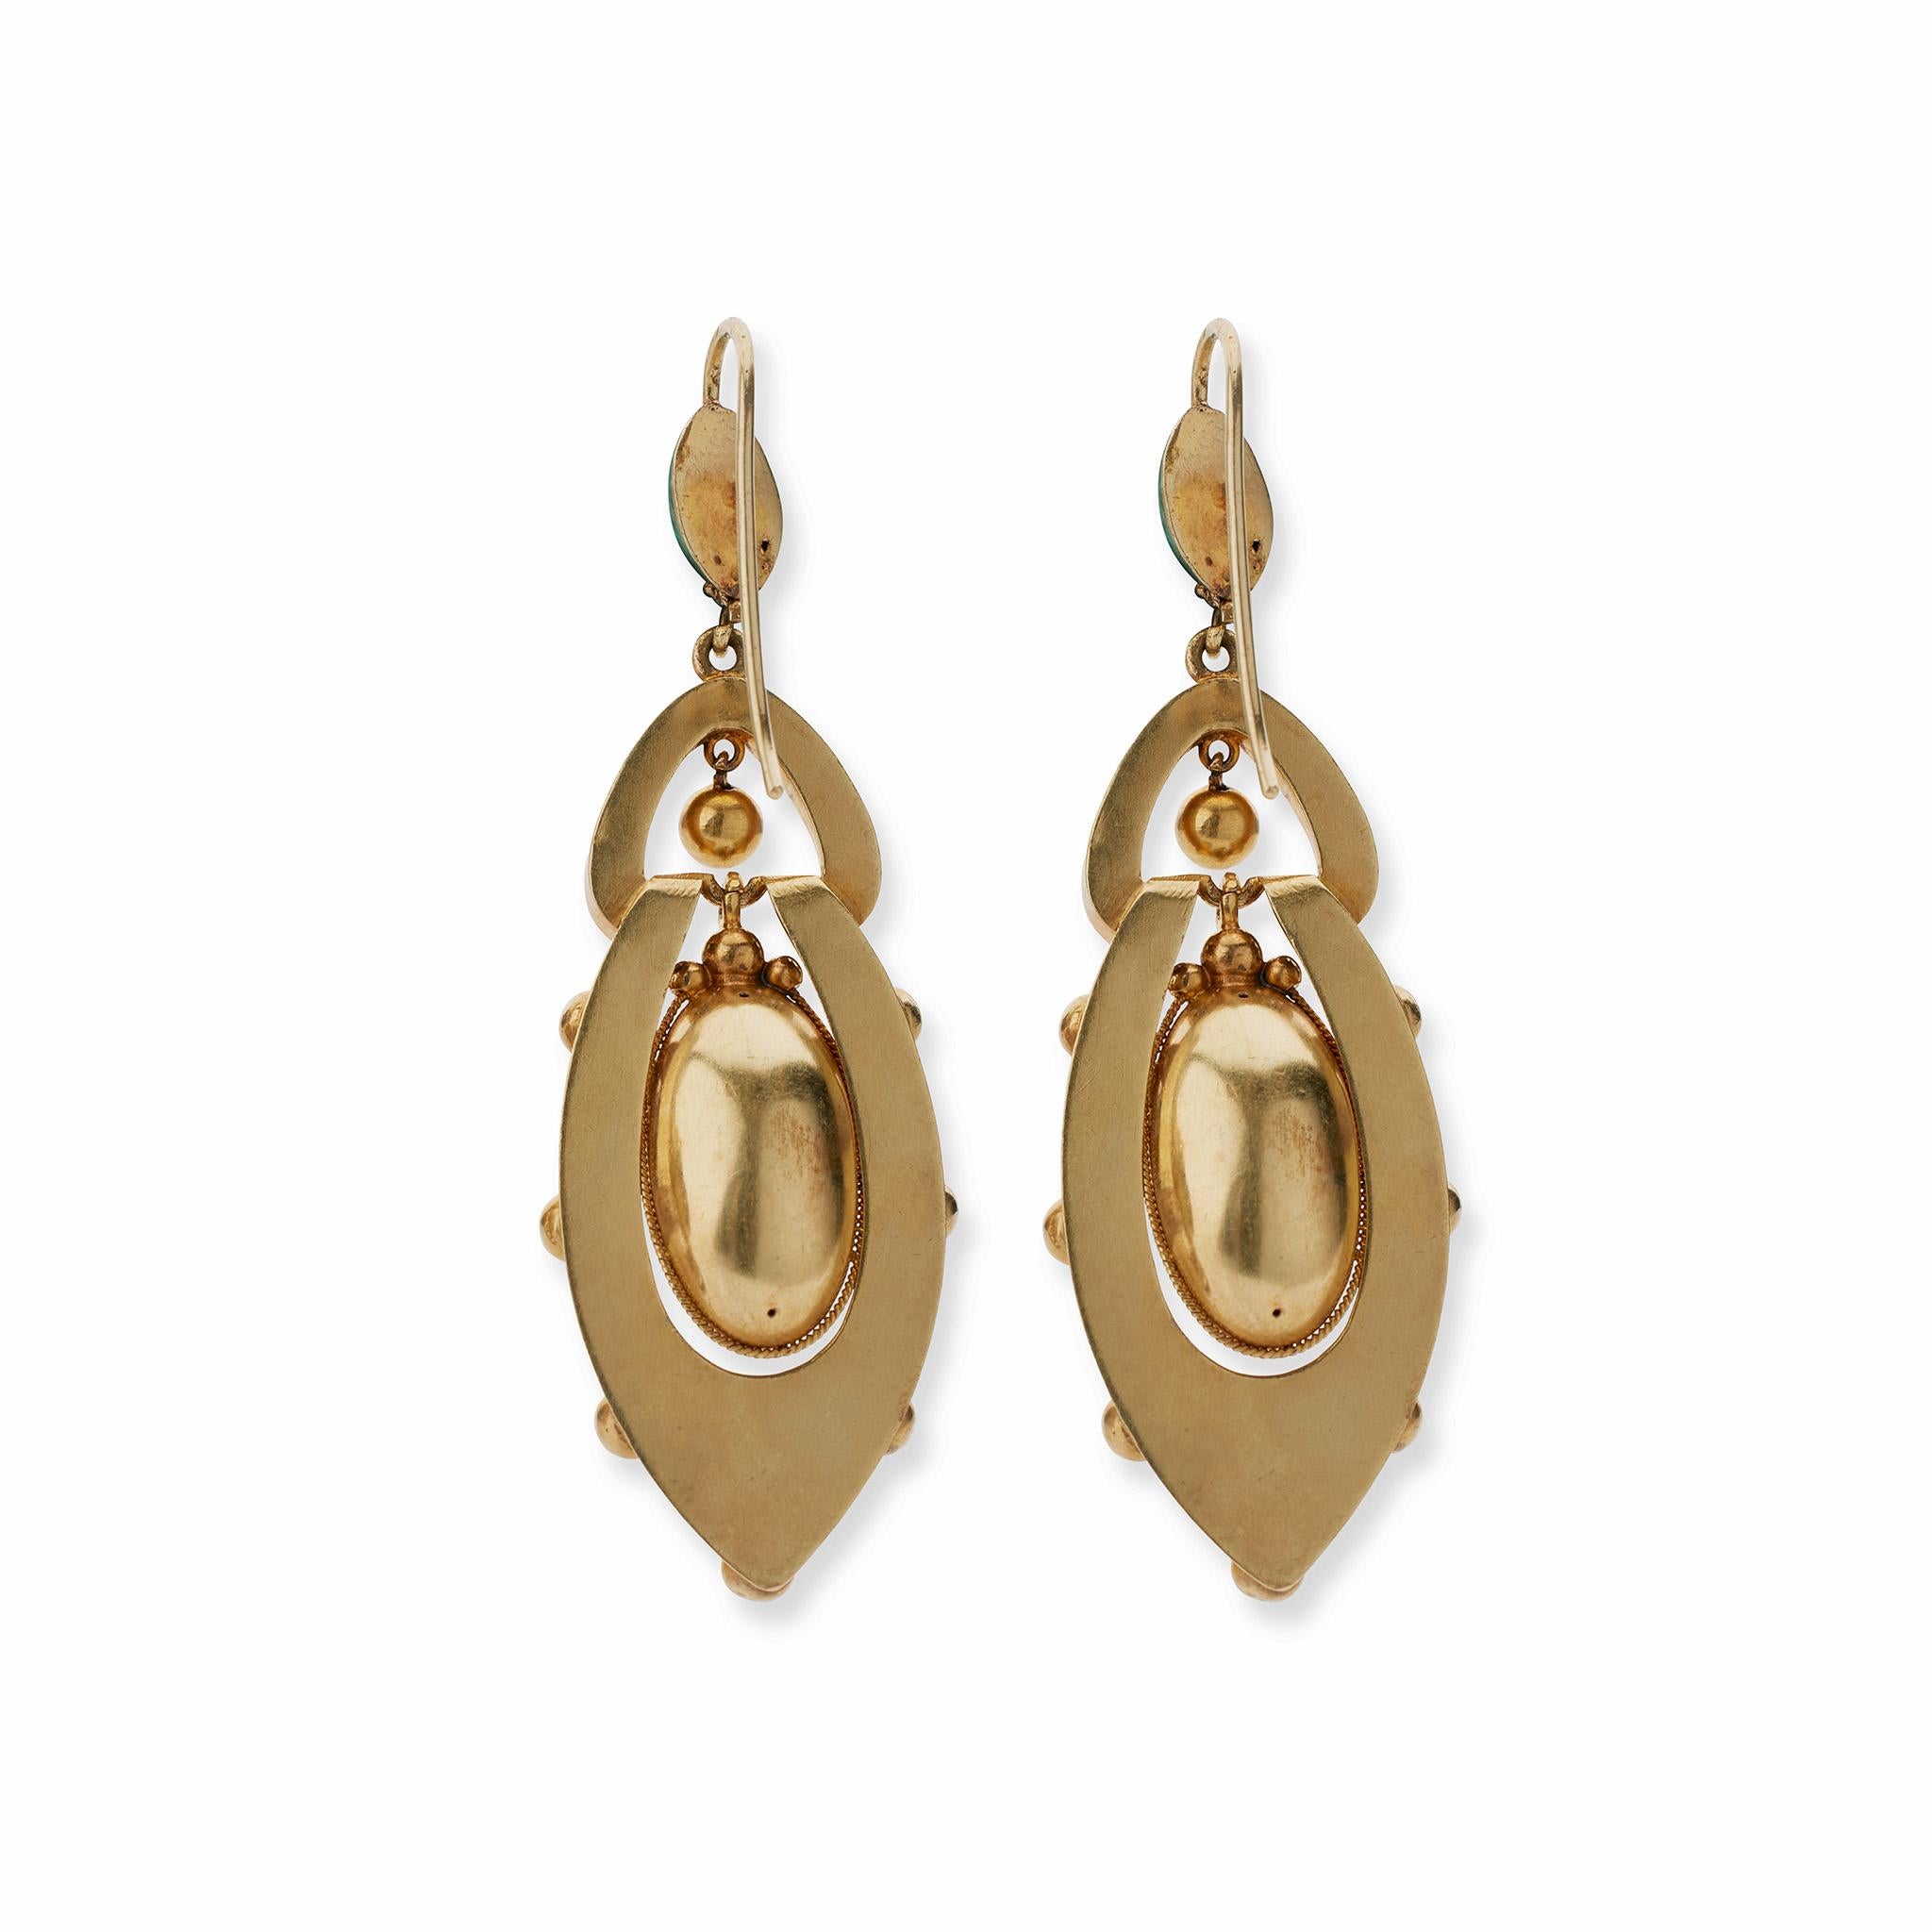 These pendant earrings in 14K gold, enamel and diamond were created in the 1870s, possibly in England. Each flexible multi-tiered form is designed as an oval top suspending an elongated elliptical form with ball and wirework accents framing a